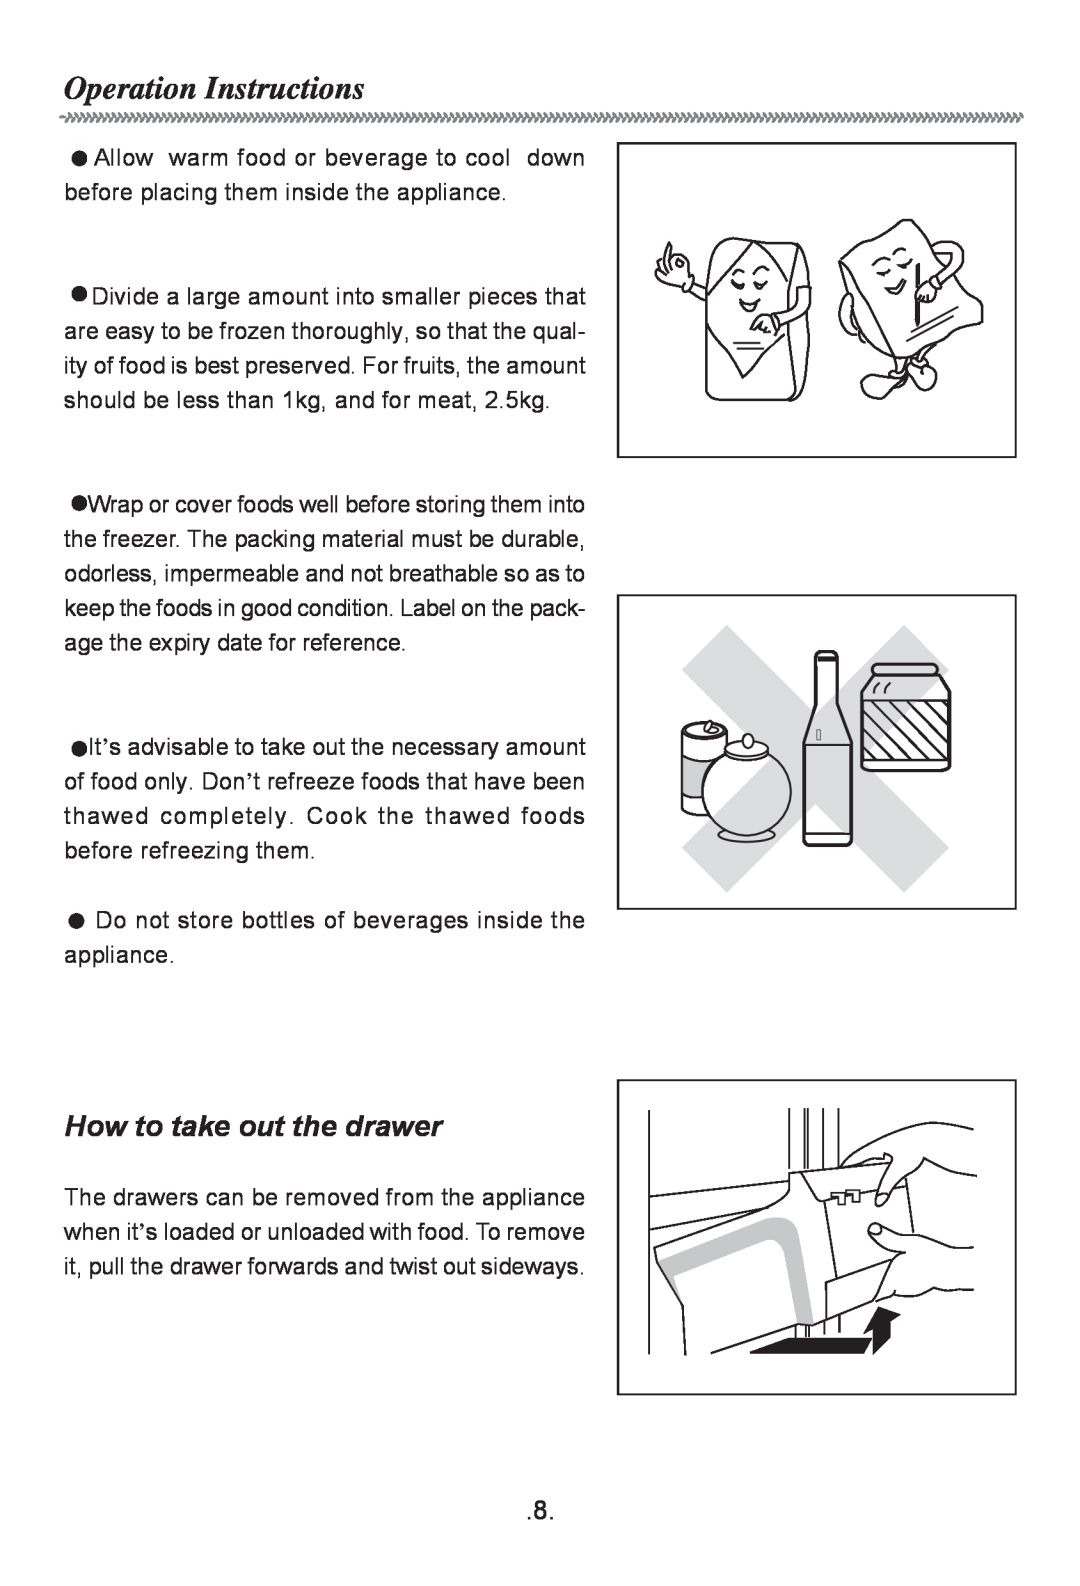 Haier HF-116R owner manual How to take out the drawer, Operation Instructions 